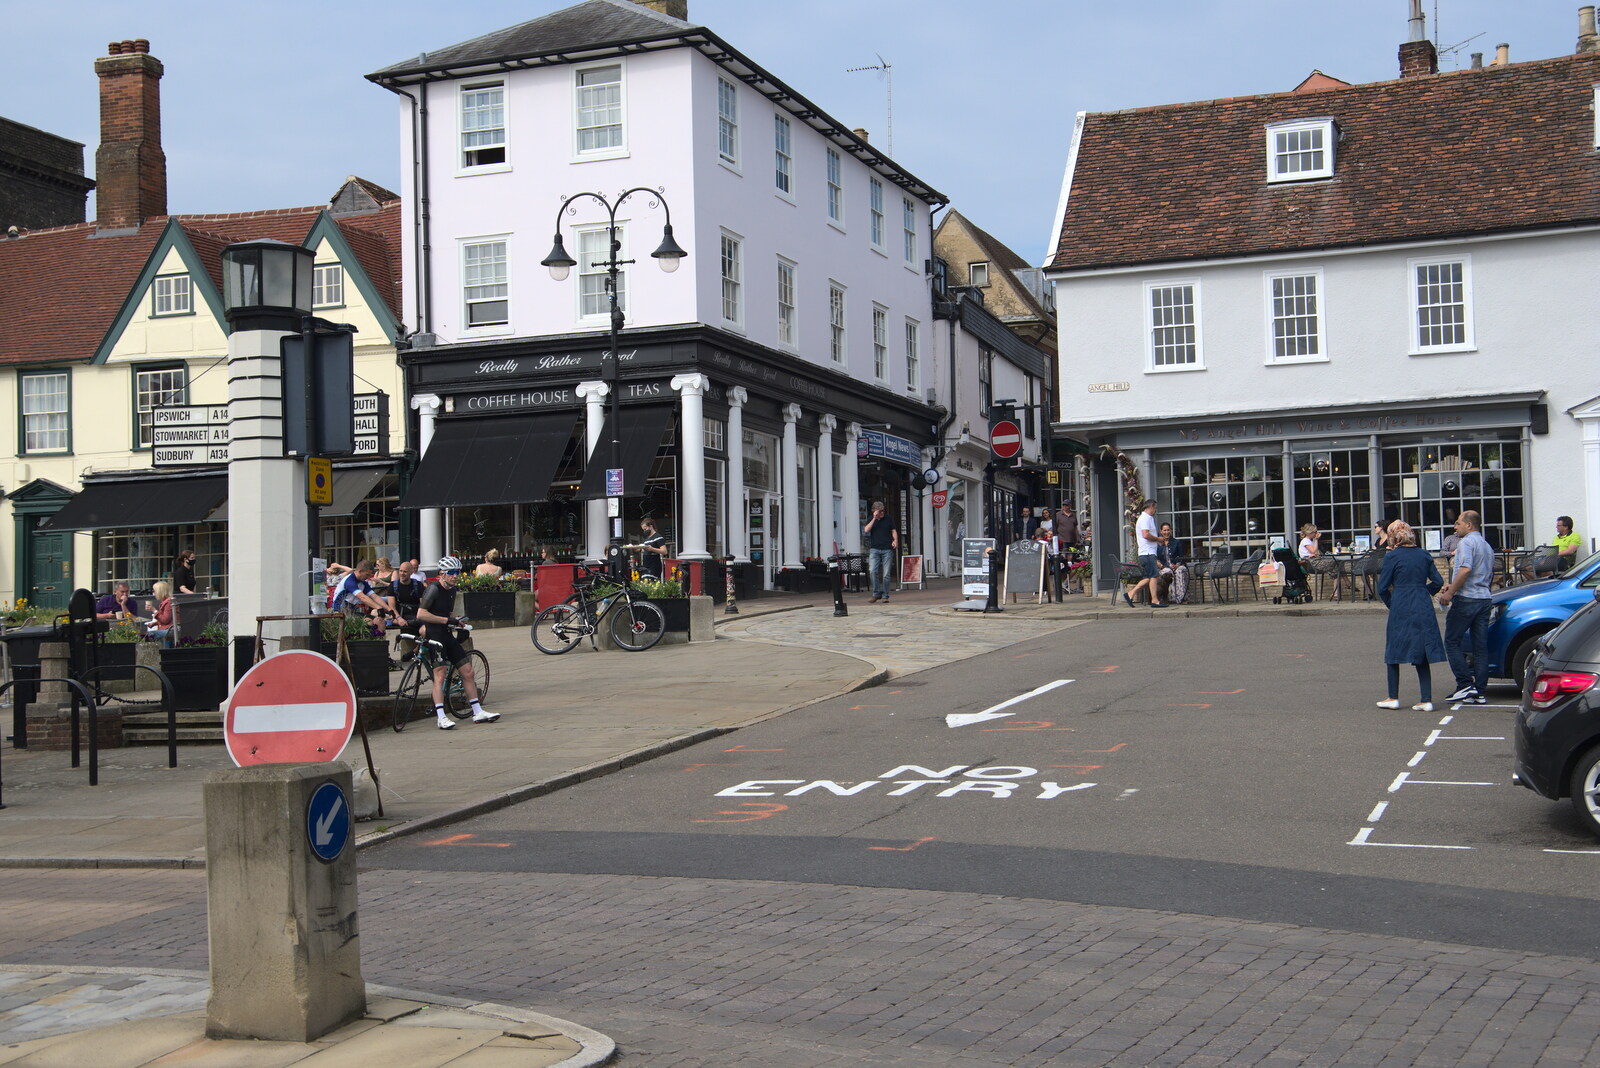 Another view up towards Abbeygate Street from A Weekend at the Angel Hotel, Bury St. Edmunds, Suffolk - 5th June 2021